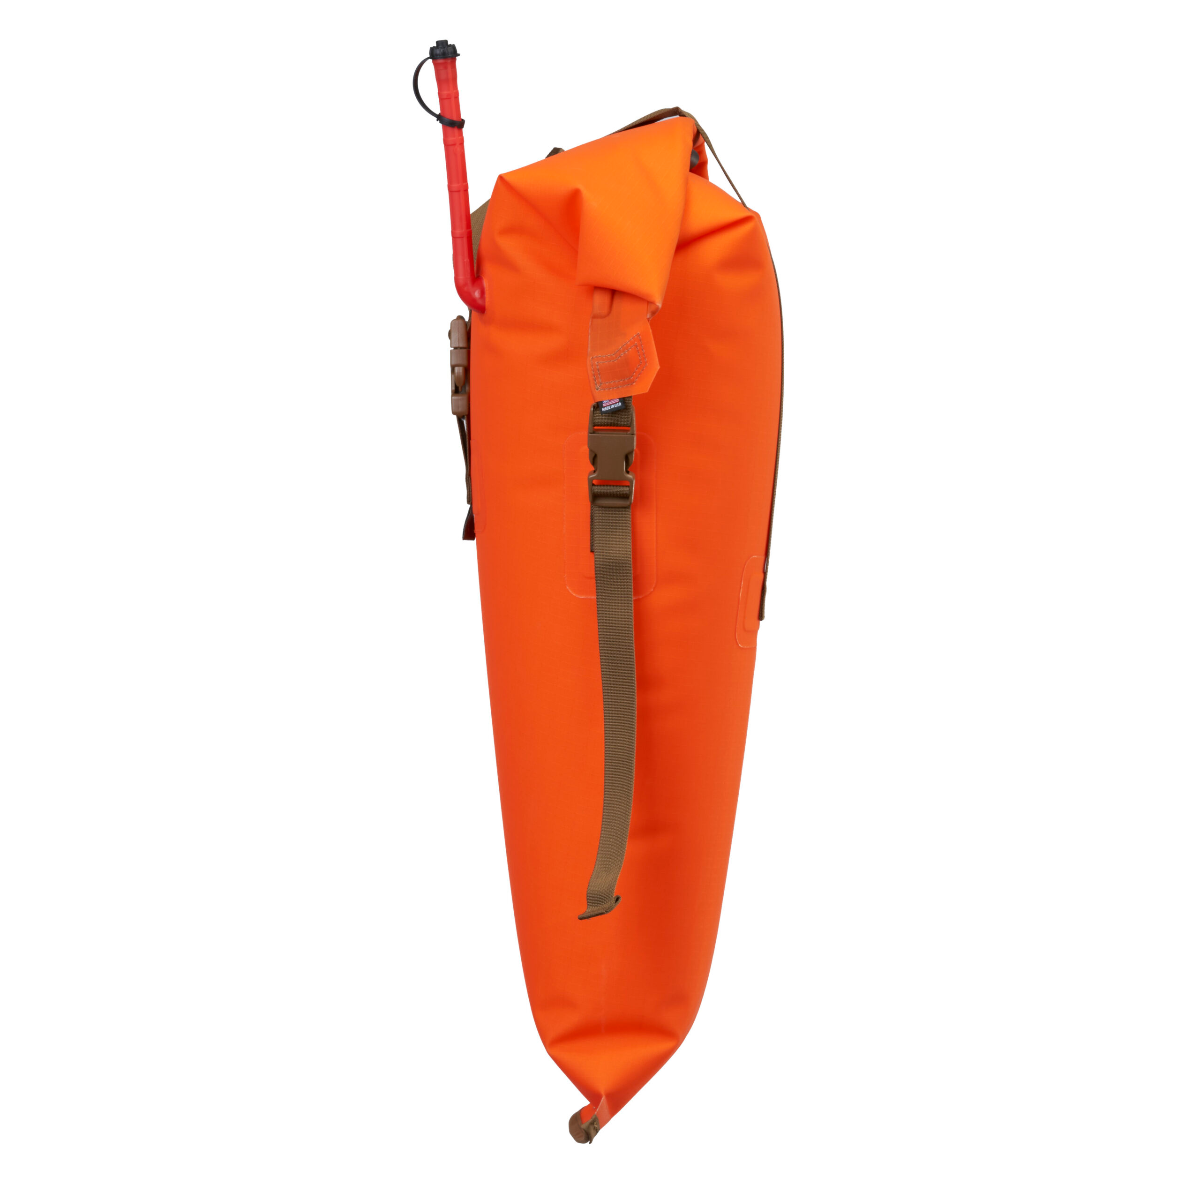 Featuring the Futa Kayak Stow Float dry bag, kayak flotation, kayak outfitting manufactured by Watershed shown here from a fourth angle.